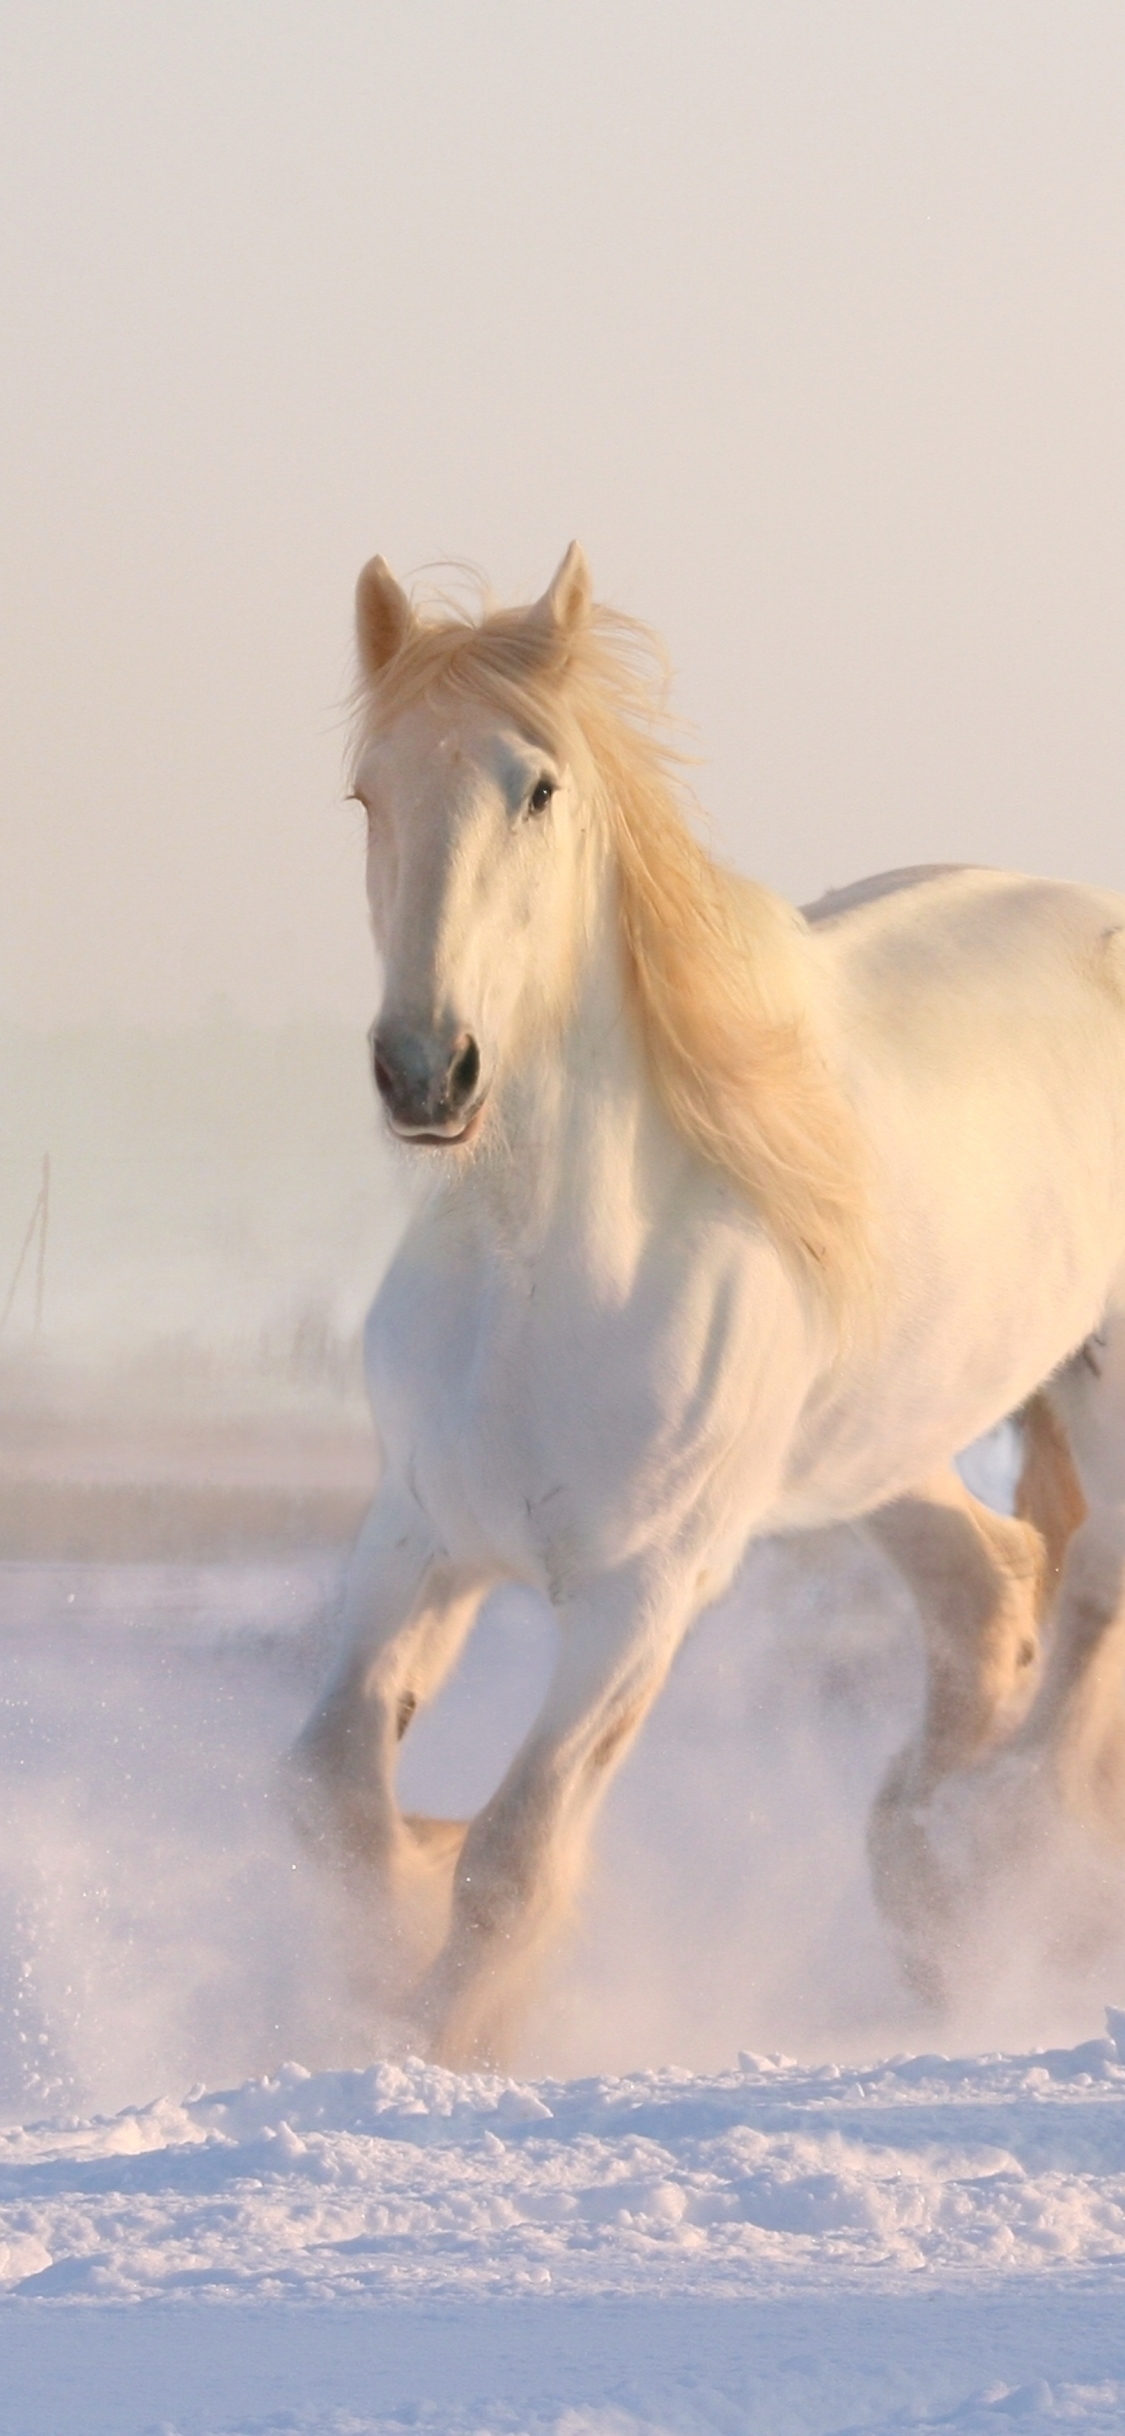 Galloping White Horse in the snow by Dorota Kudyba